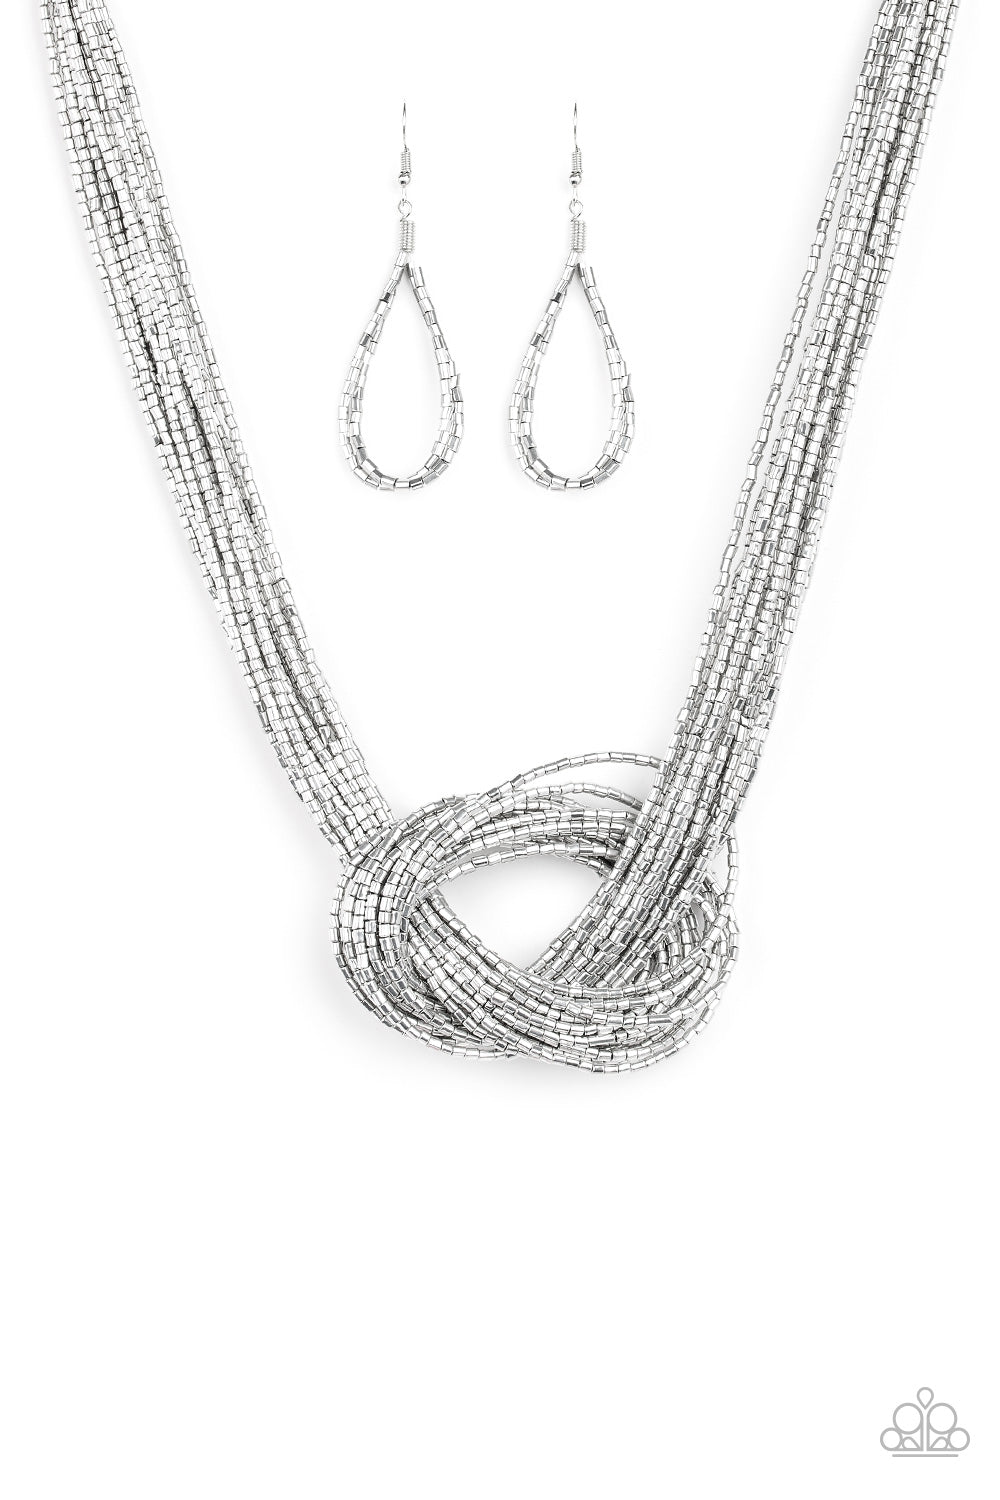 Paparazzi Accessories Knotted Knockout - Silver Seedbead Necklaces - Lady T Accessories